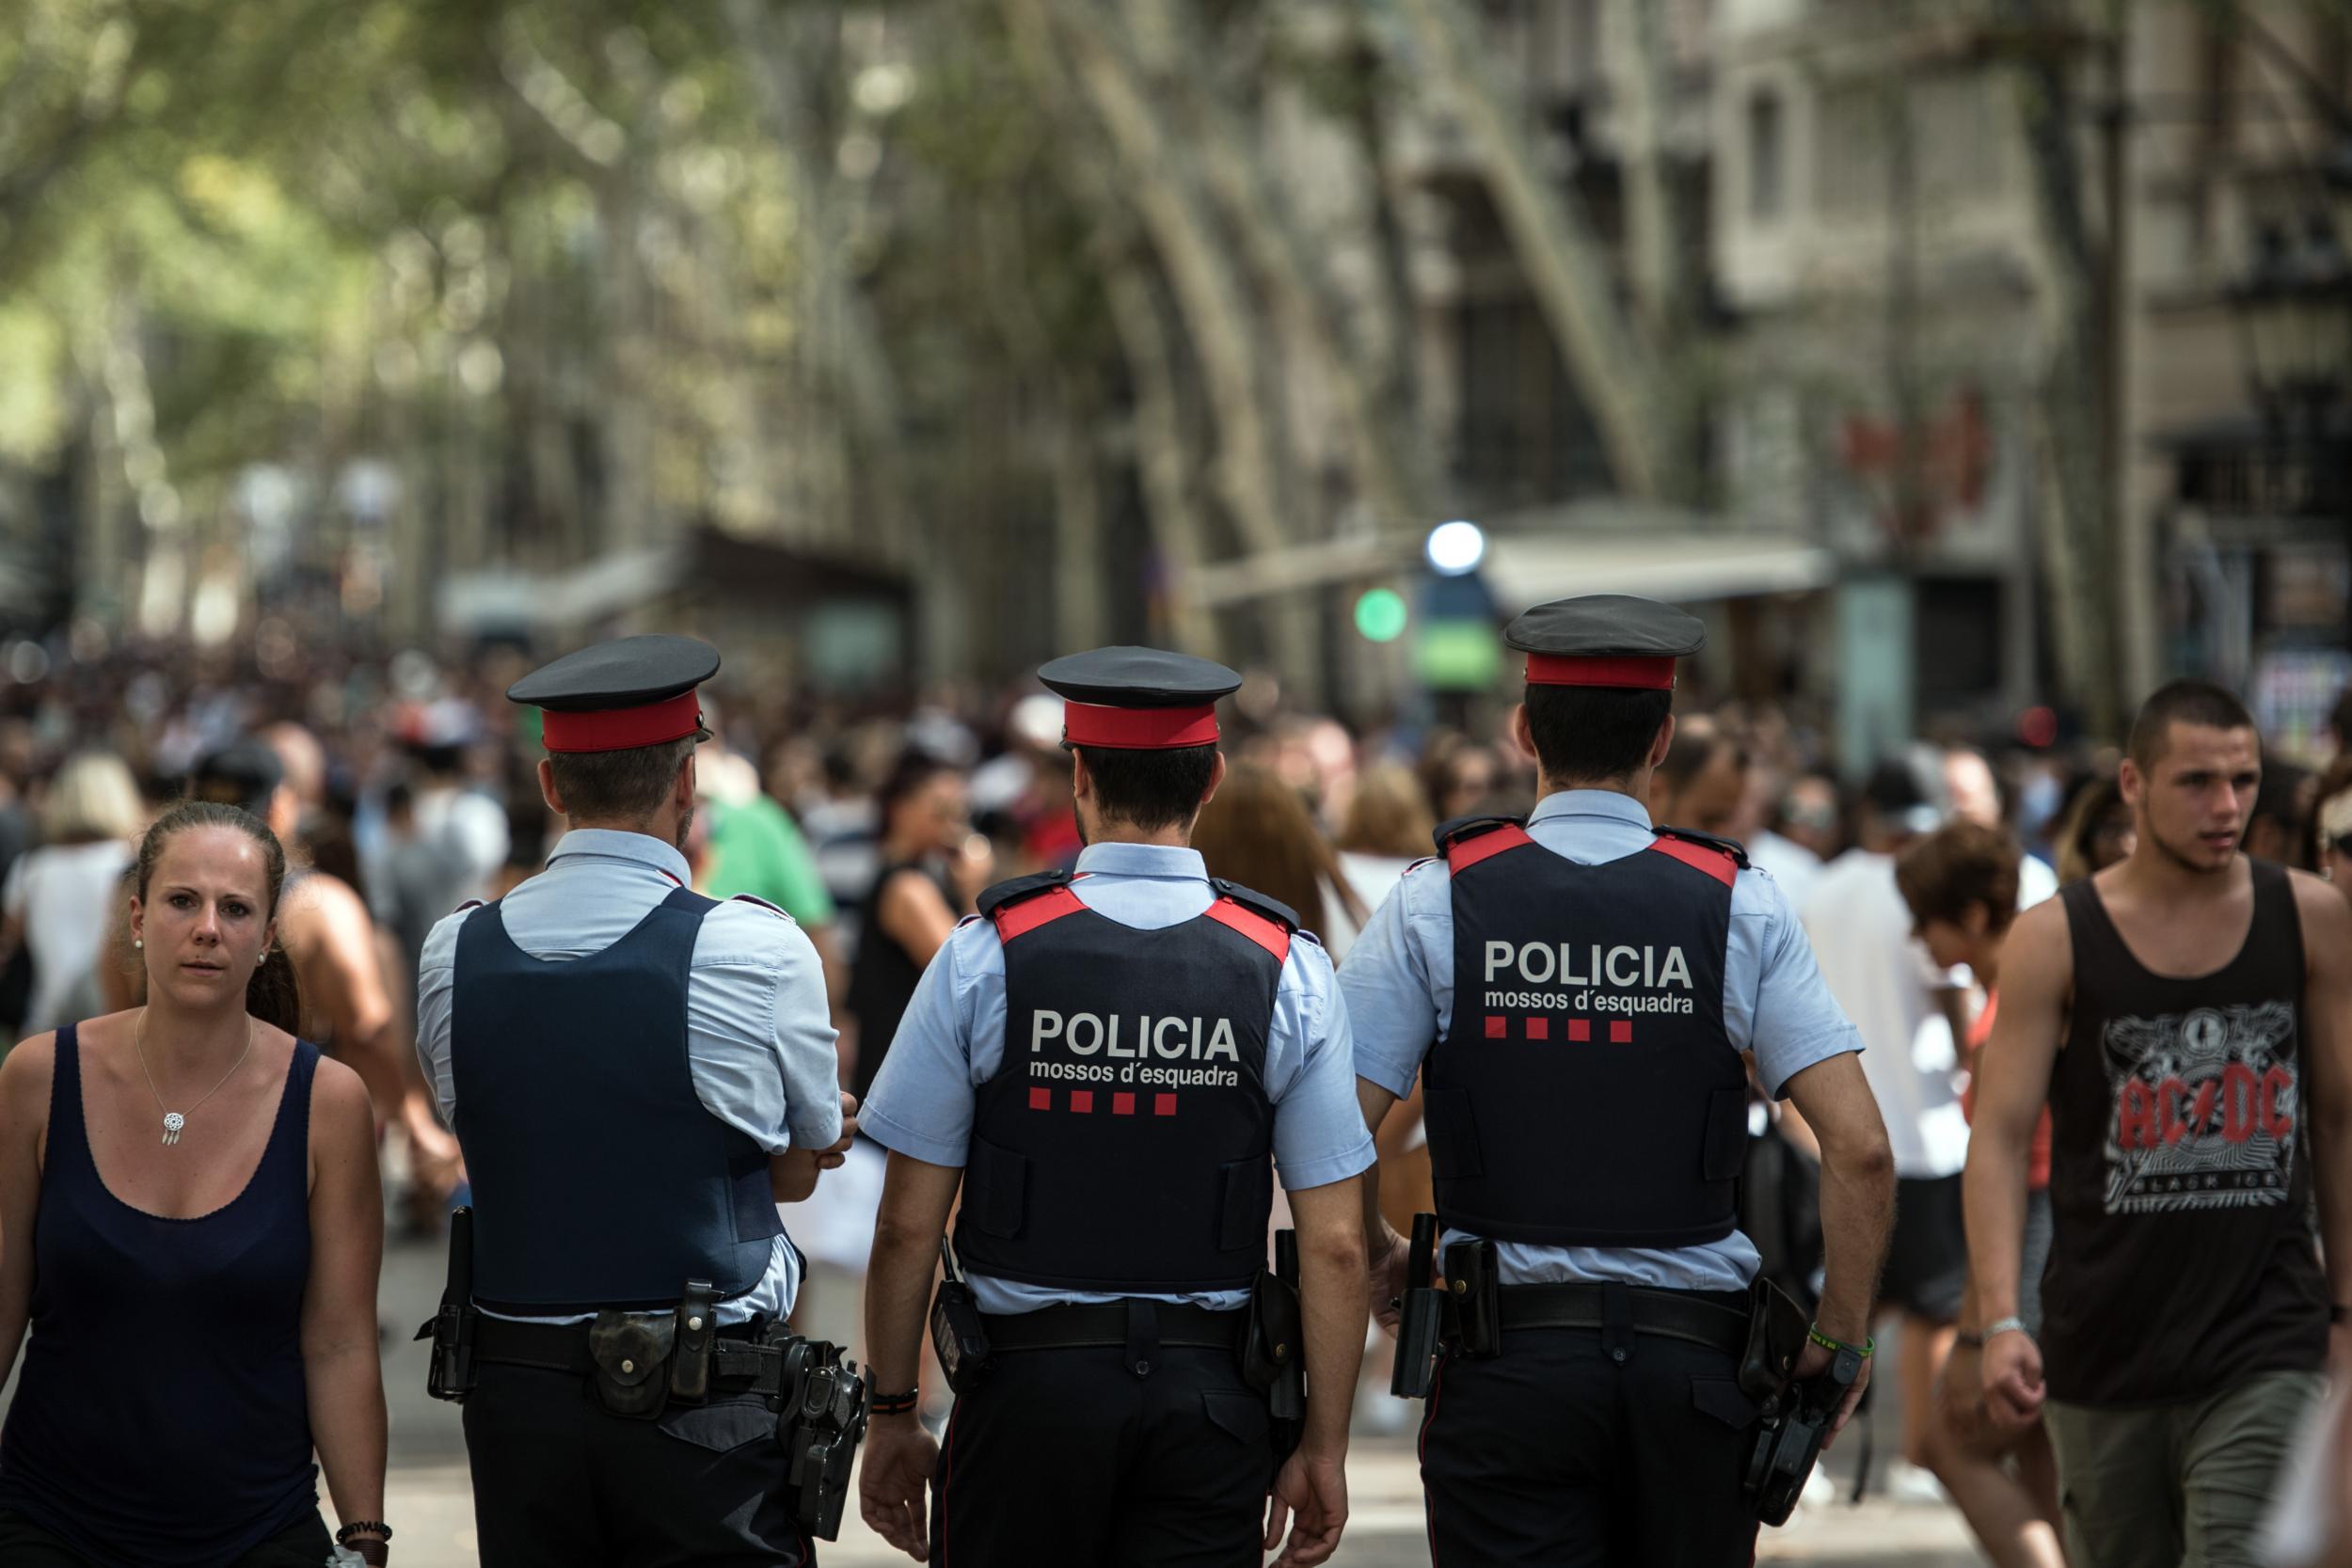 It comes just weeks after extremists launched a deadly attack on one of Barcelona's most famous tourist areas